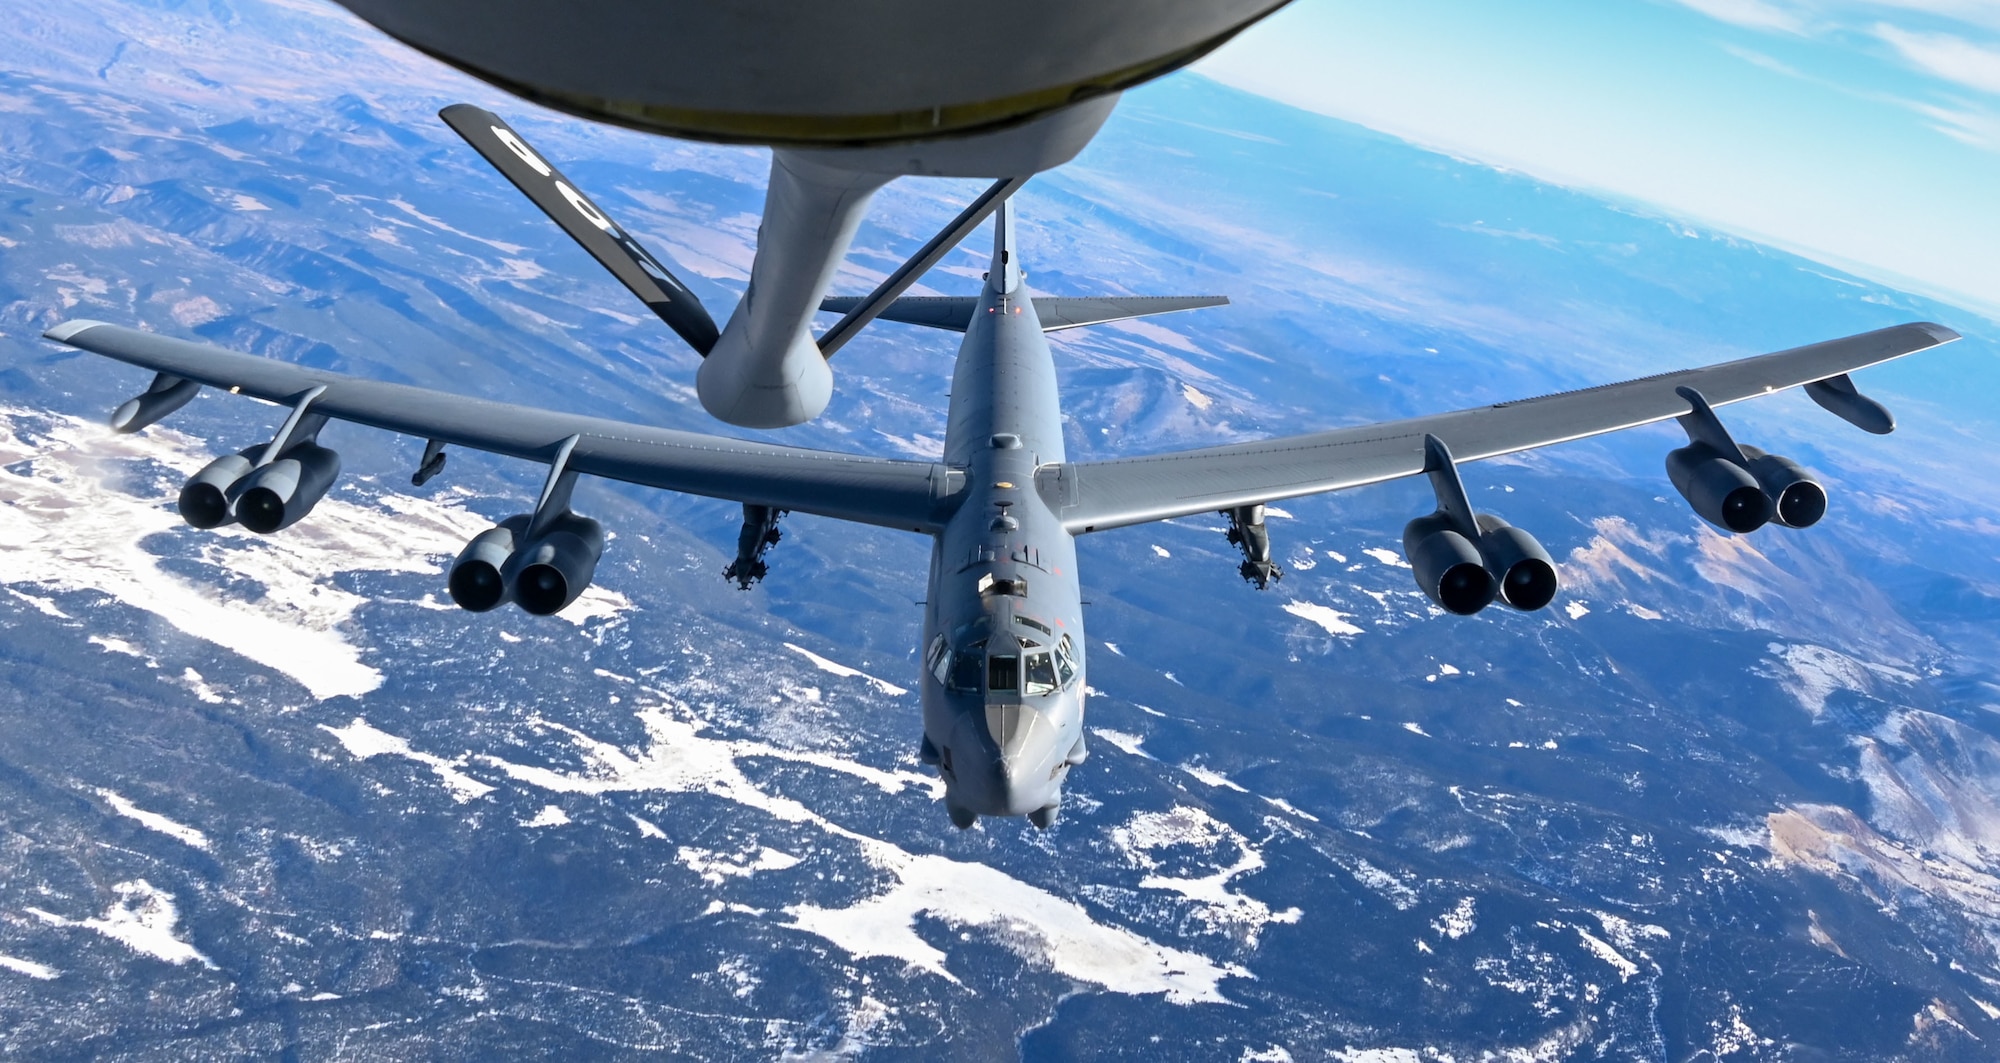 A B-52 Stratofortress assigned to the 96th Bomb Squadron Barksdale Air Force Base, Louisiana, prepares to refuel with a KC-135 Stratotanker assigned to the 465th Air Refueling Squadron, Tinker AFB, Oklahoma, above the Rocky Mountains, Dec. 13, 2021. Aerial refueling allows aircraft to travel vast distances without landing to bring airpower anytime, anywhere around the world. (U.S. Air Force photo by 2nd Lt. Mary Begy)